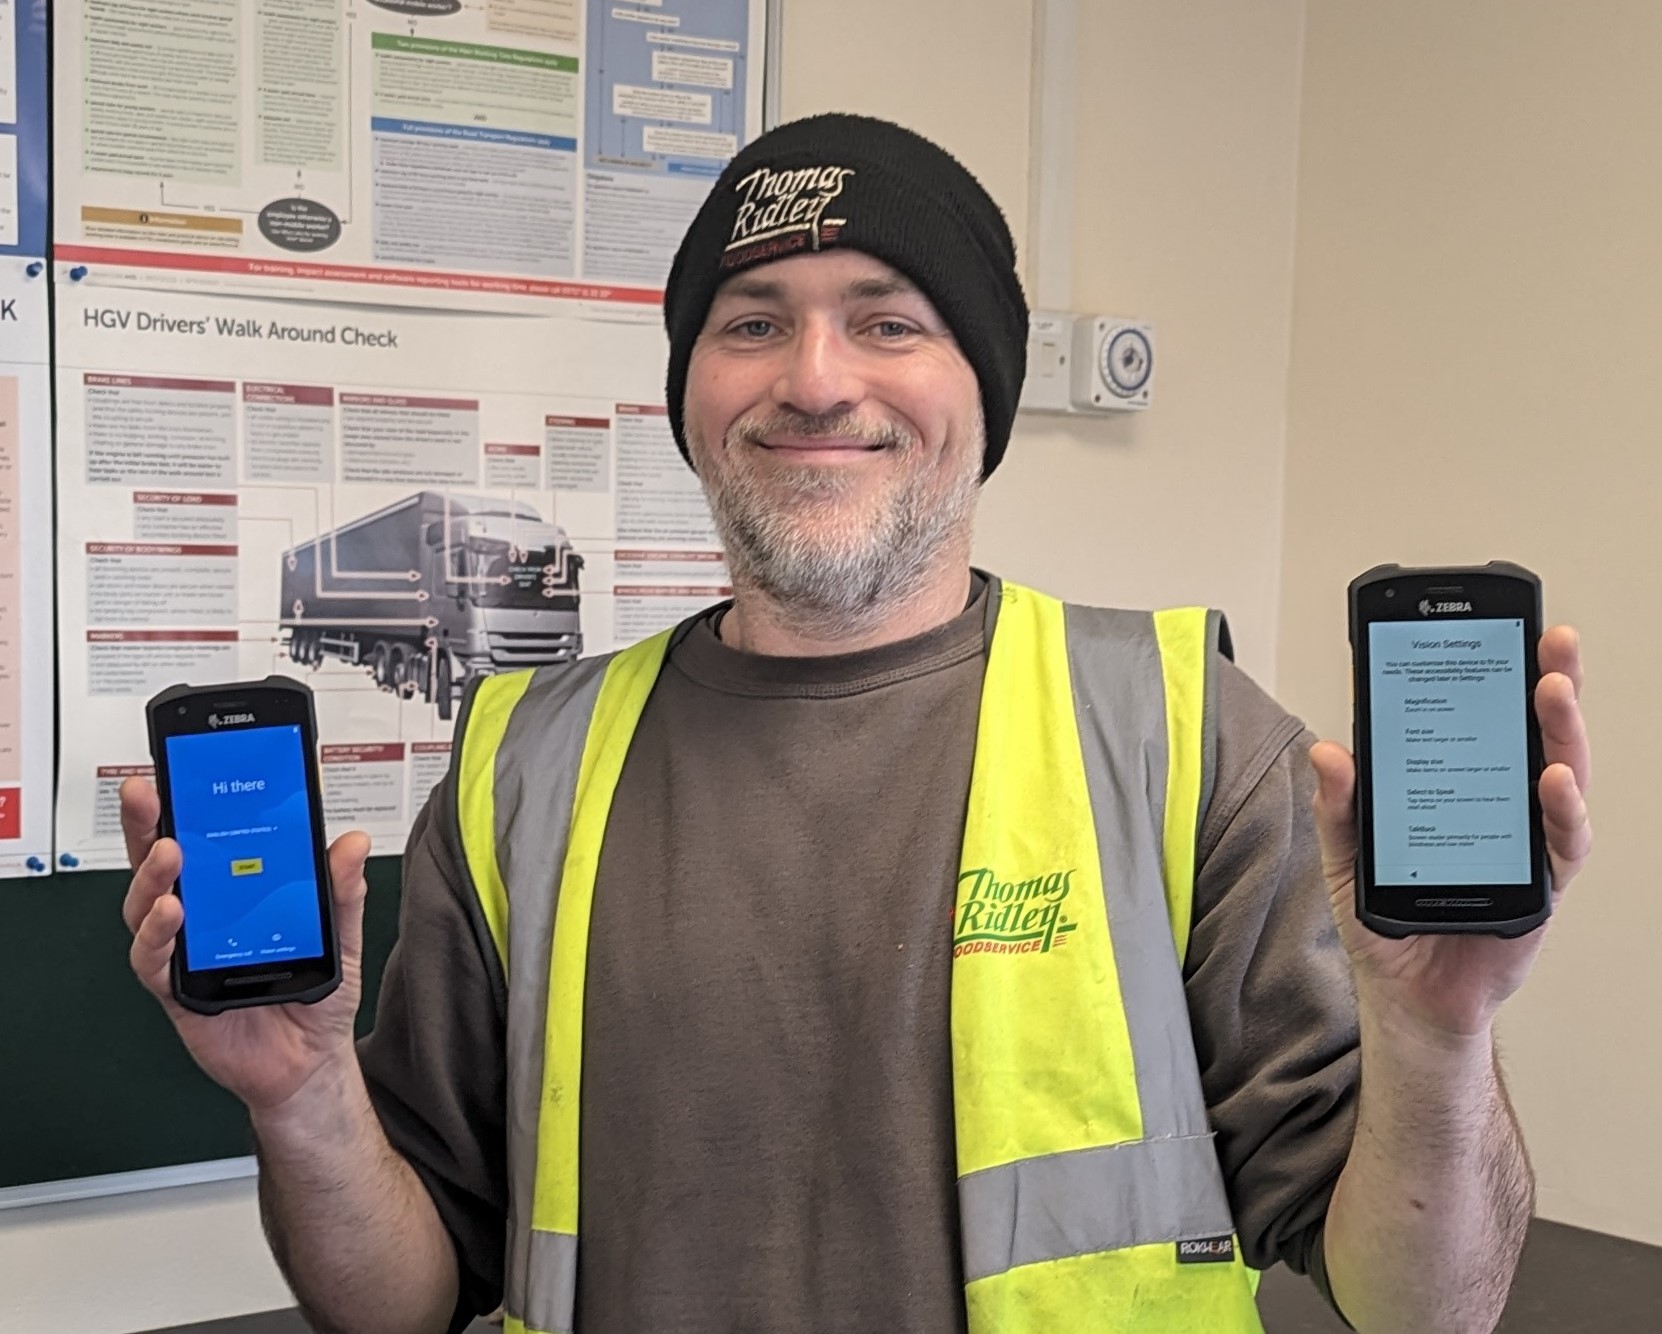 Image of Rob Poulton showing the new podfather system on two mobile phones